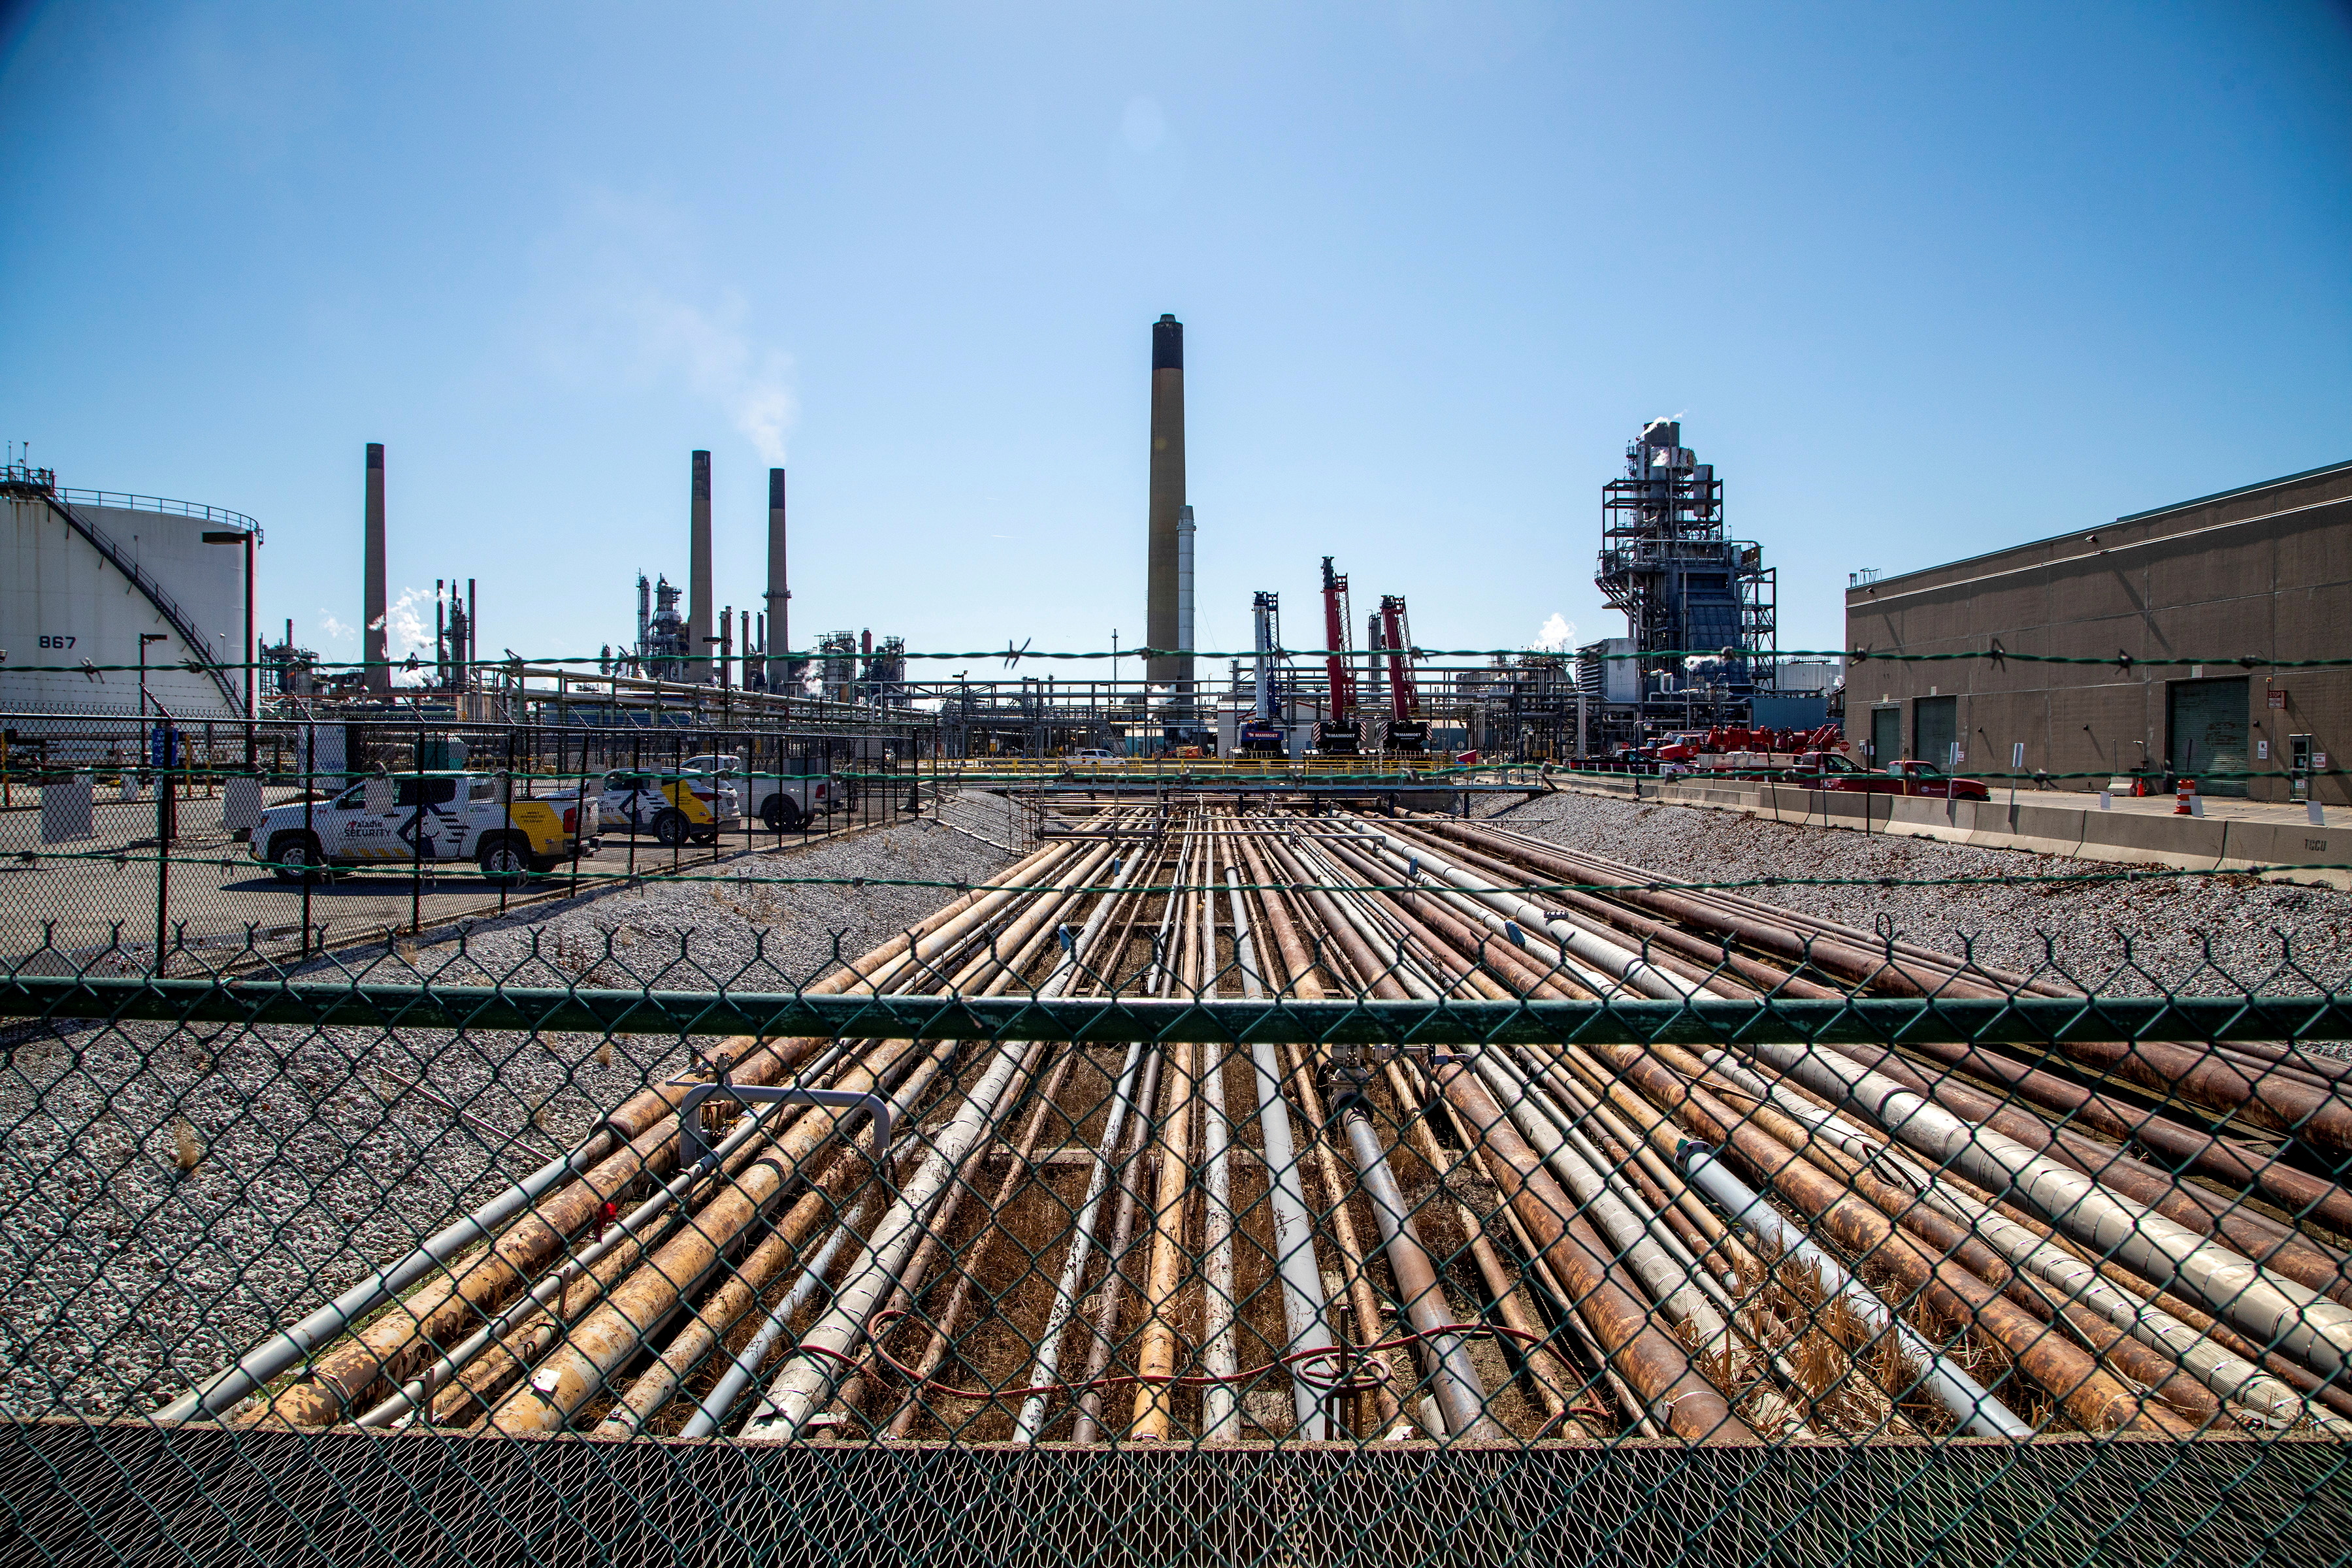 General view of the Imperial Oil refinery, located near Enbridge's Line 5 pipeline, which Michigan Governor Gretchen Whitmer ordered shut down in May 2021, in Sarnia, Ontario, Canada March 20, 2021.  Picture taken through a fence. REUTERS/Carlos Osorio